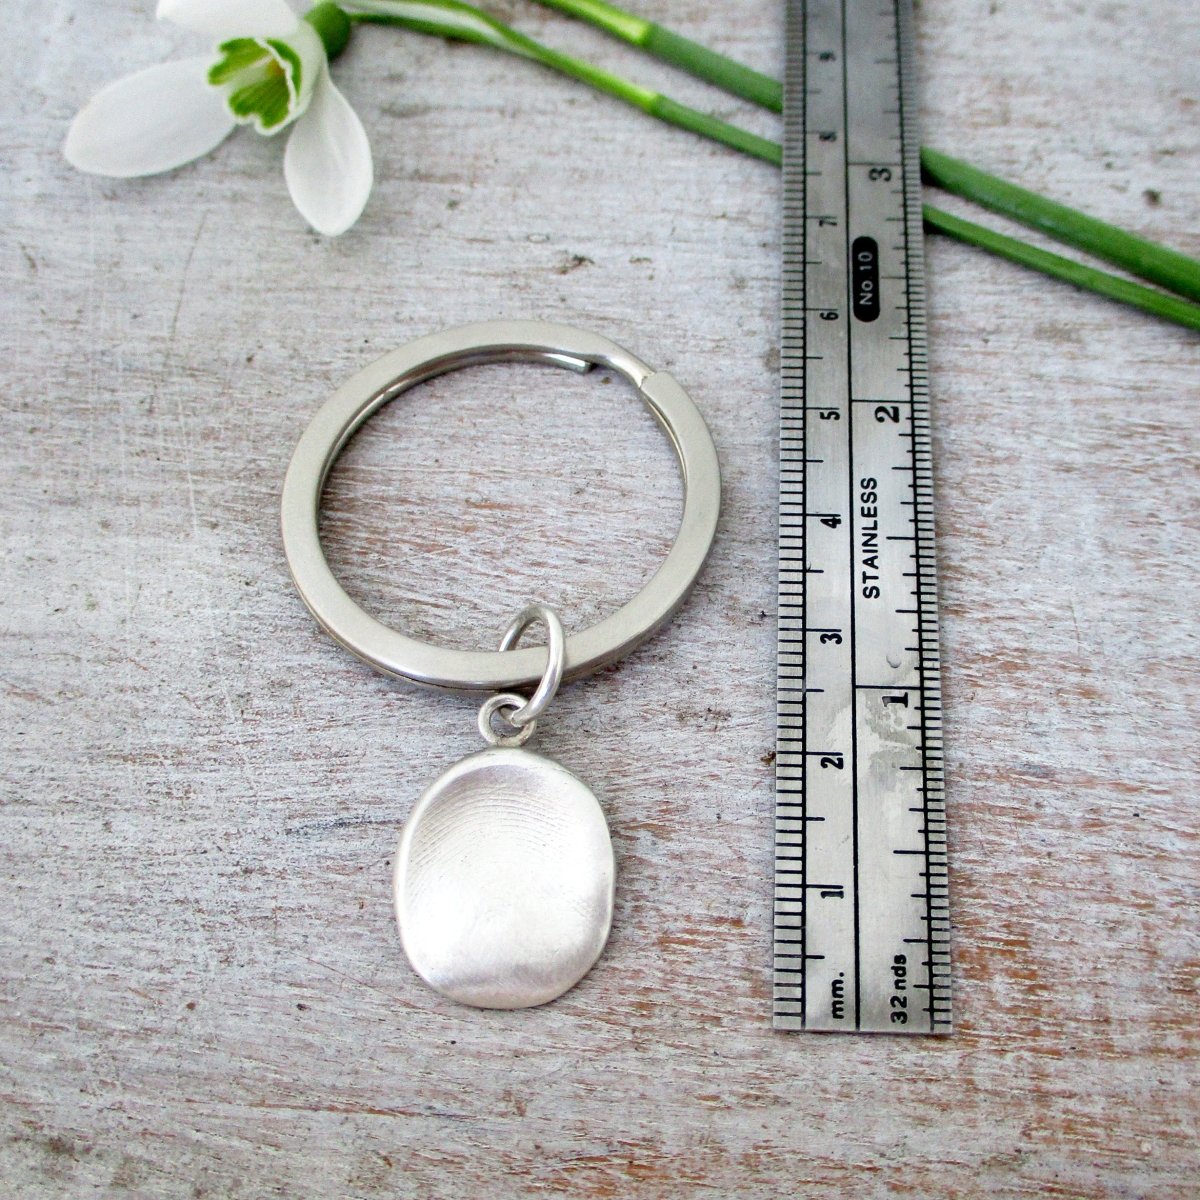 Solid Silver Fingerprint Impression Key Ring and Kit - Luxe Design Jewellery